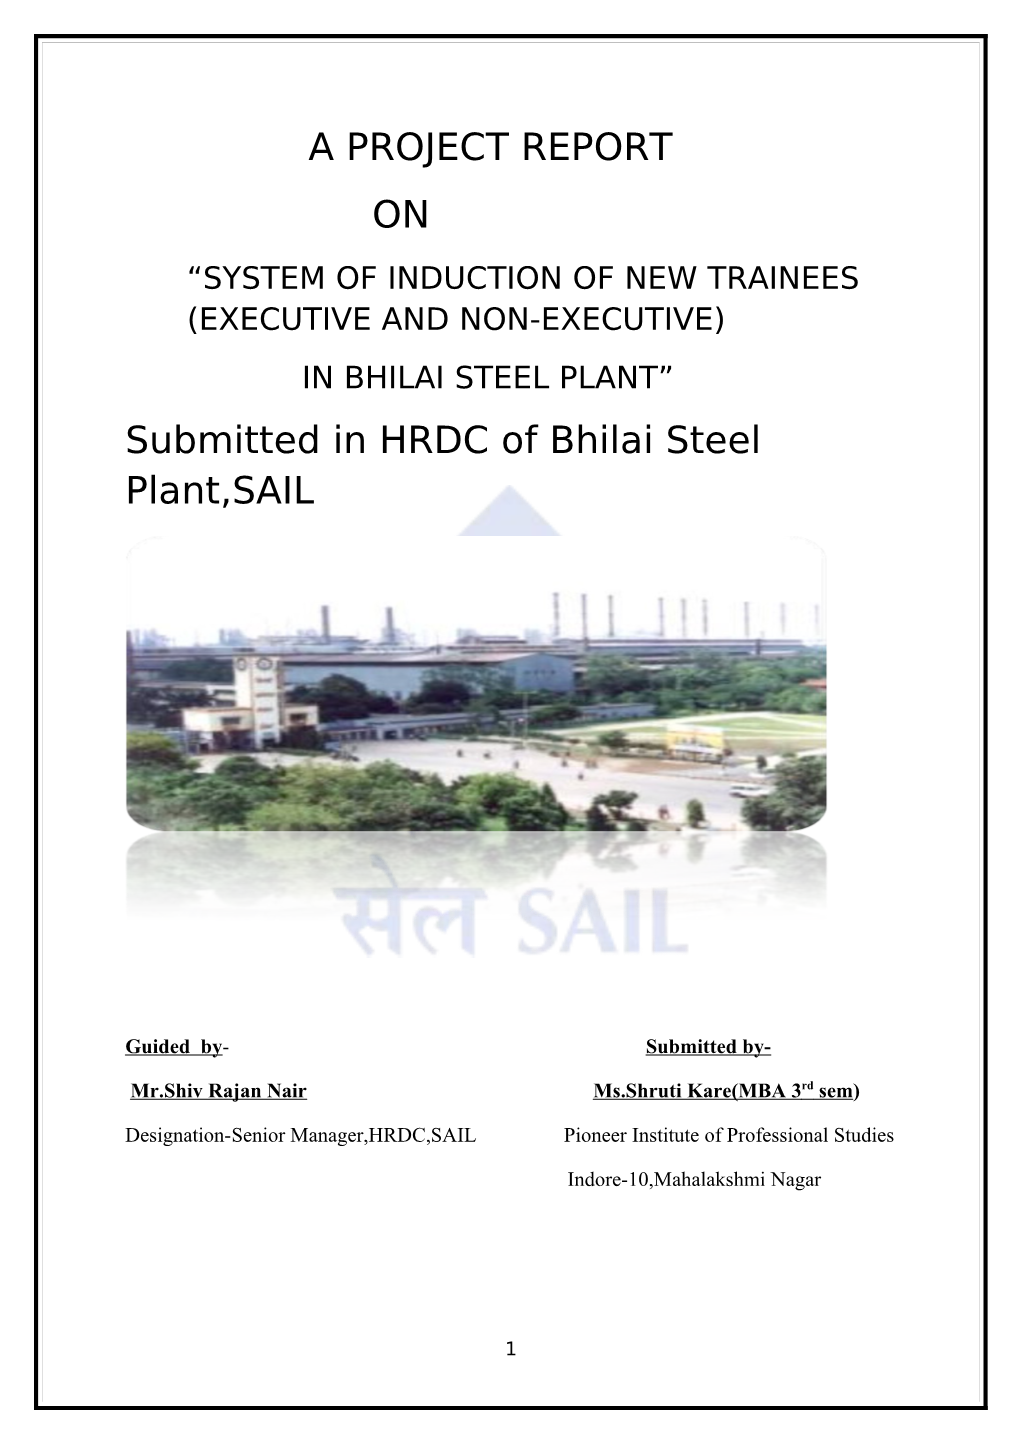 A PROJECT REPORT on Submitted in HRDC of Bhilai Steel Plant,SAIL